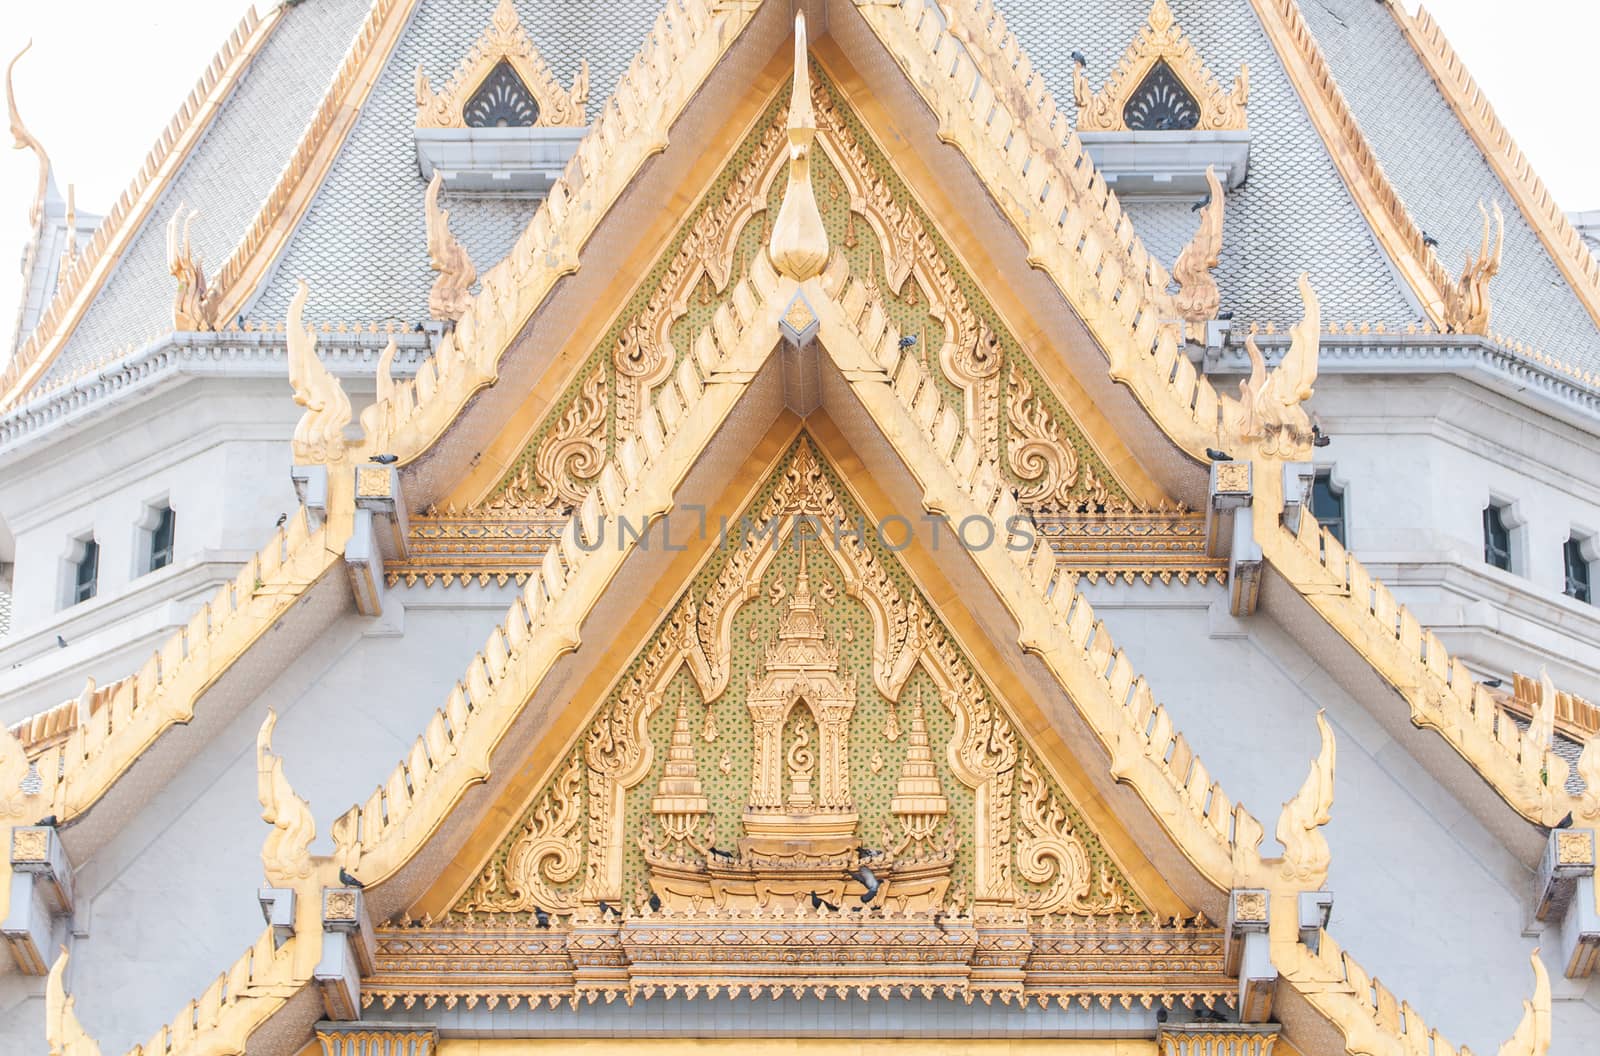 Roof detail of Wat Sothon in Thailand